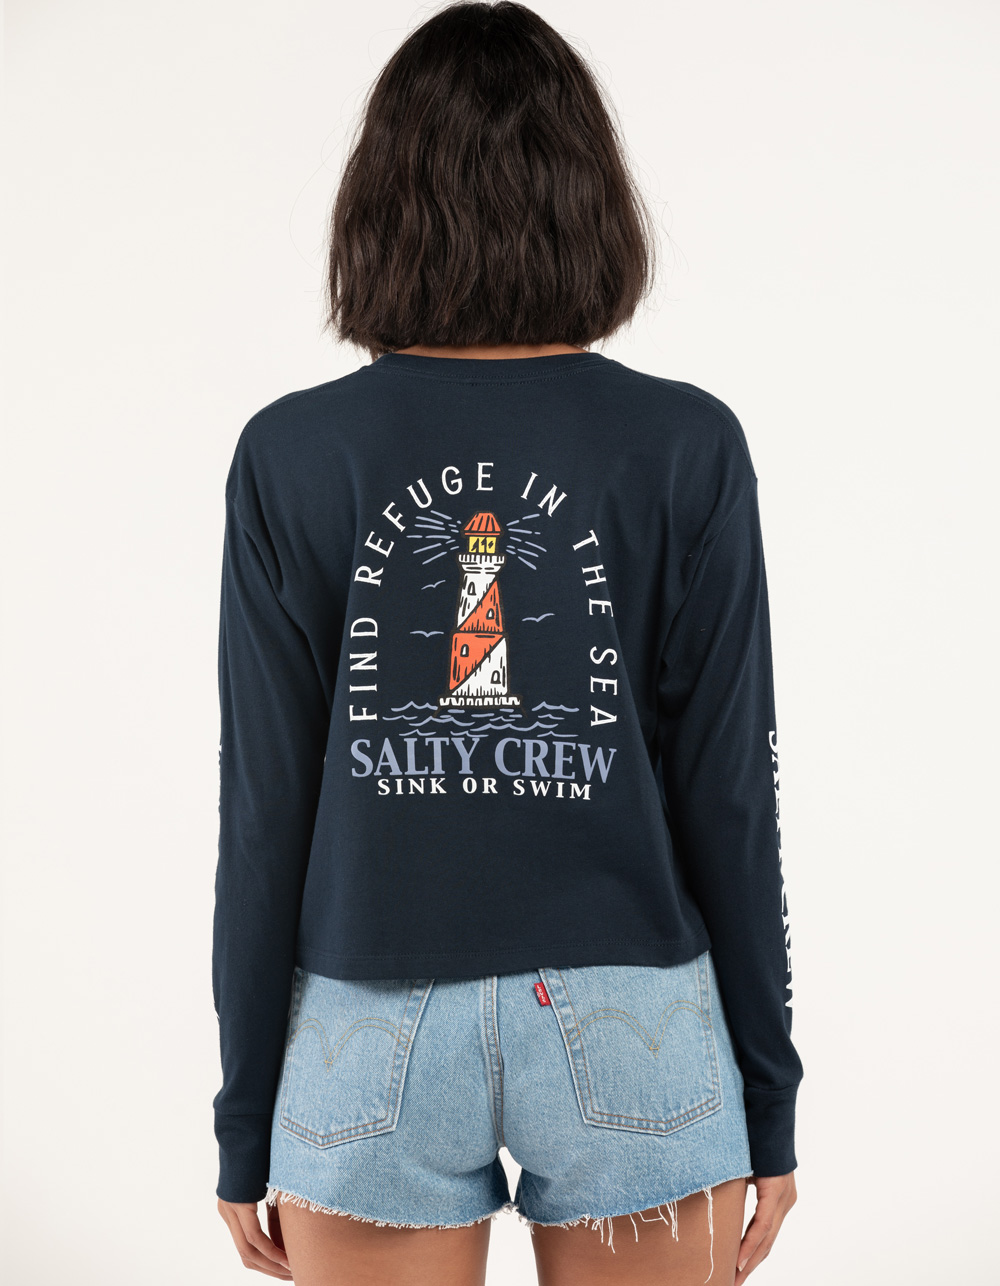 SALTY CREW Outer Womens Crop Tee